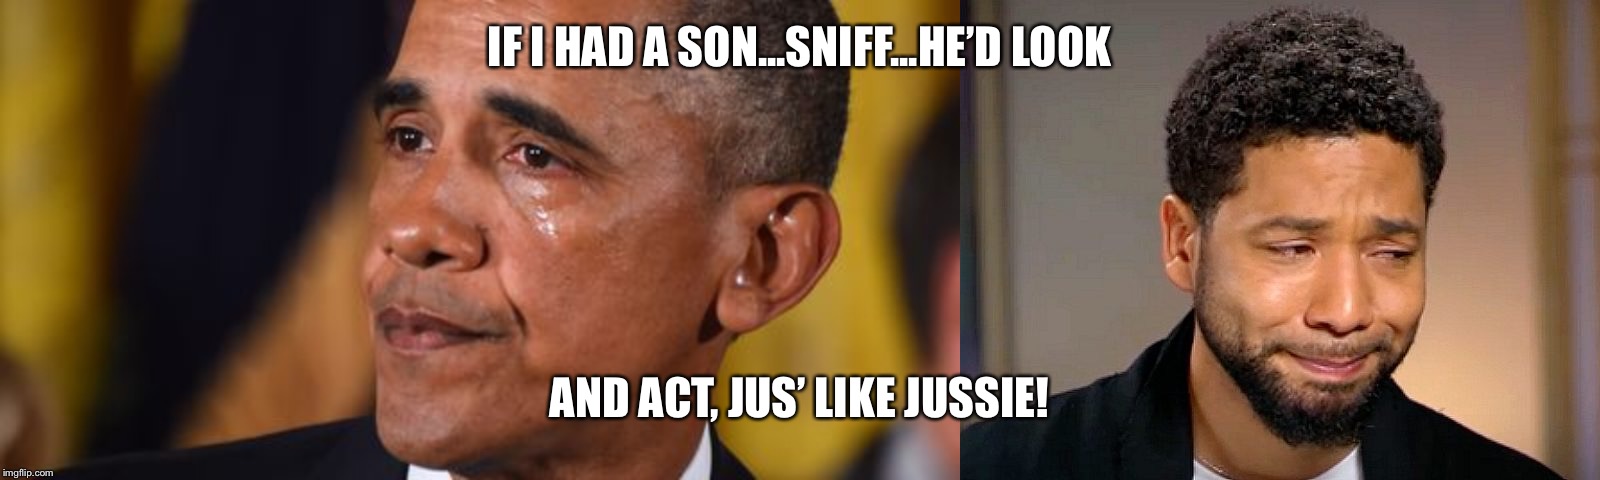 Passing the torch  | IF I HAD A SON...SNIFF...HE’D LOOK; AND ACT, JUS’ LIKE JUSSIE! | image tagged in jussie smollett,obama,barack obama,haters,democrats | made w/ Imgflip meme maker